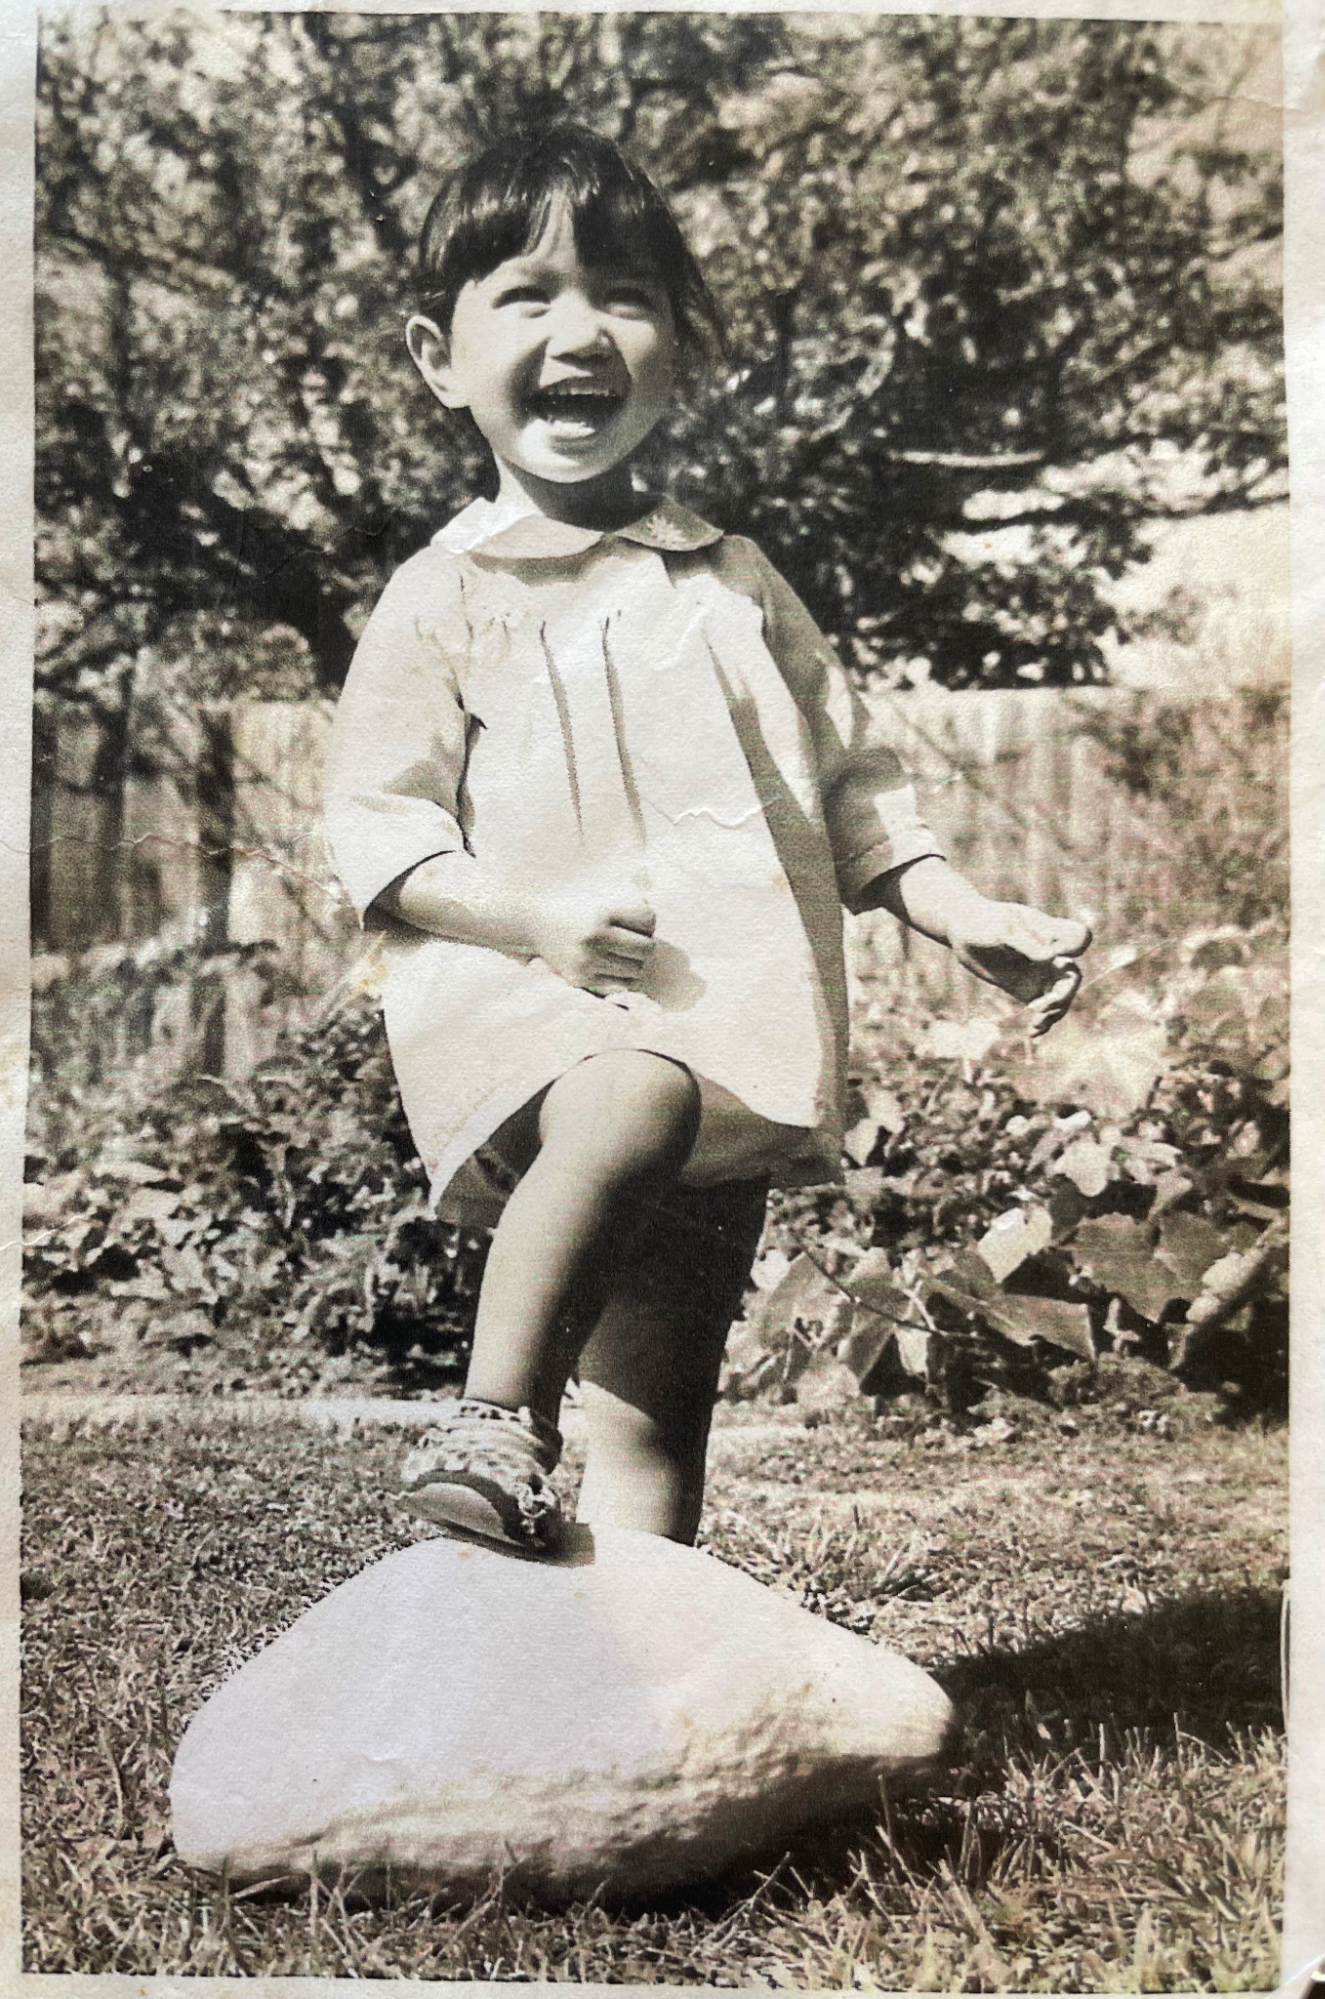 A sepia image of a laughing child in a garden, one foot on a rock in front of her